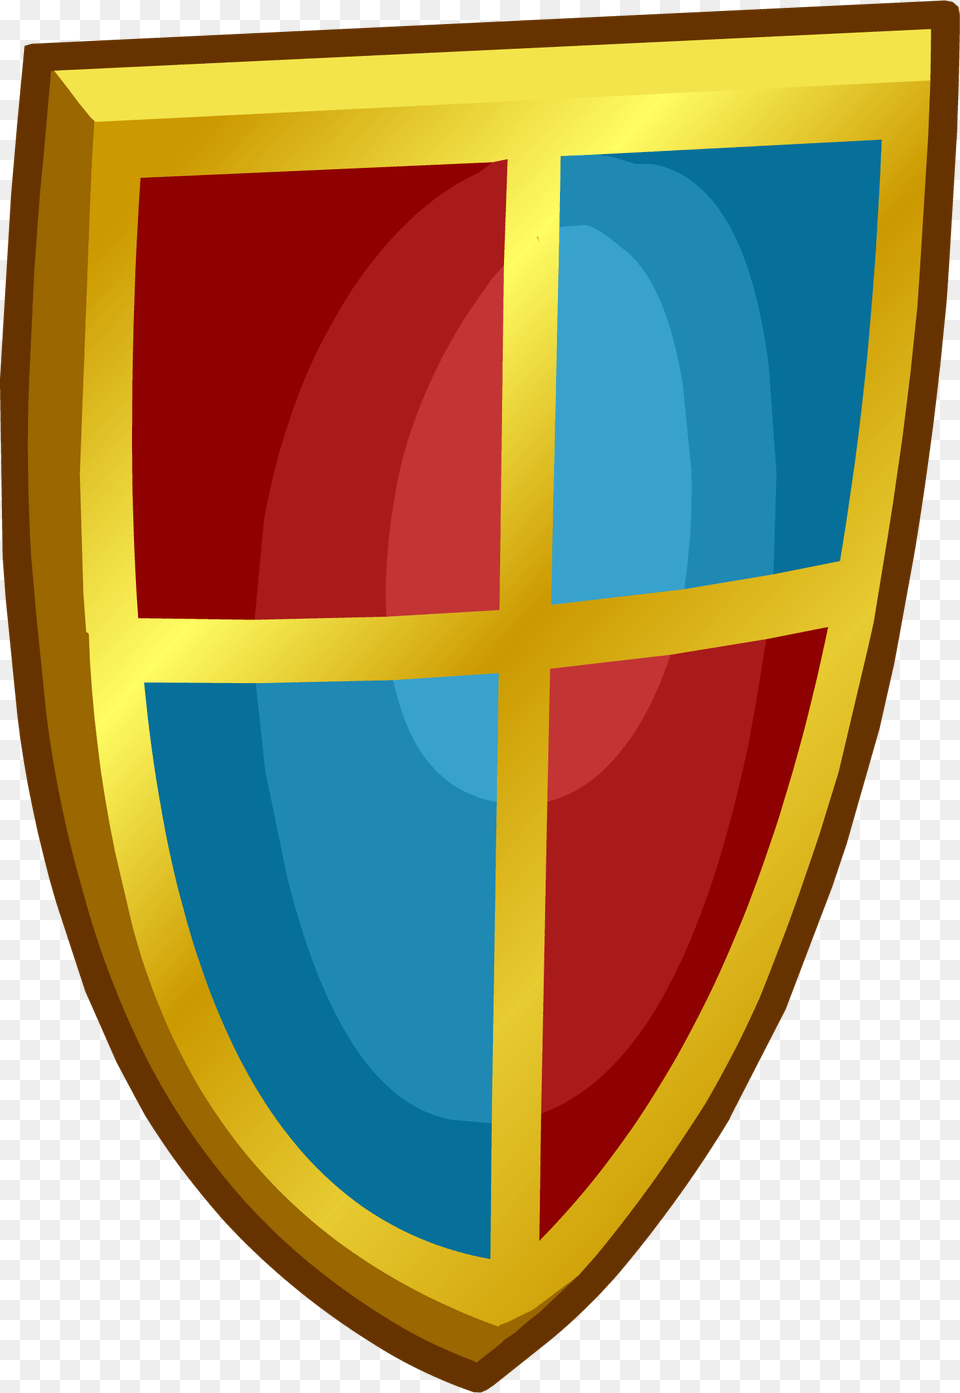 Gold Shield Club Penguin Shield, Armor Png Image